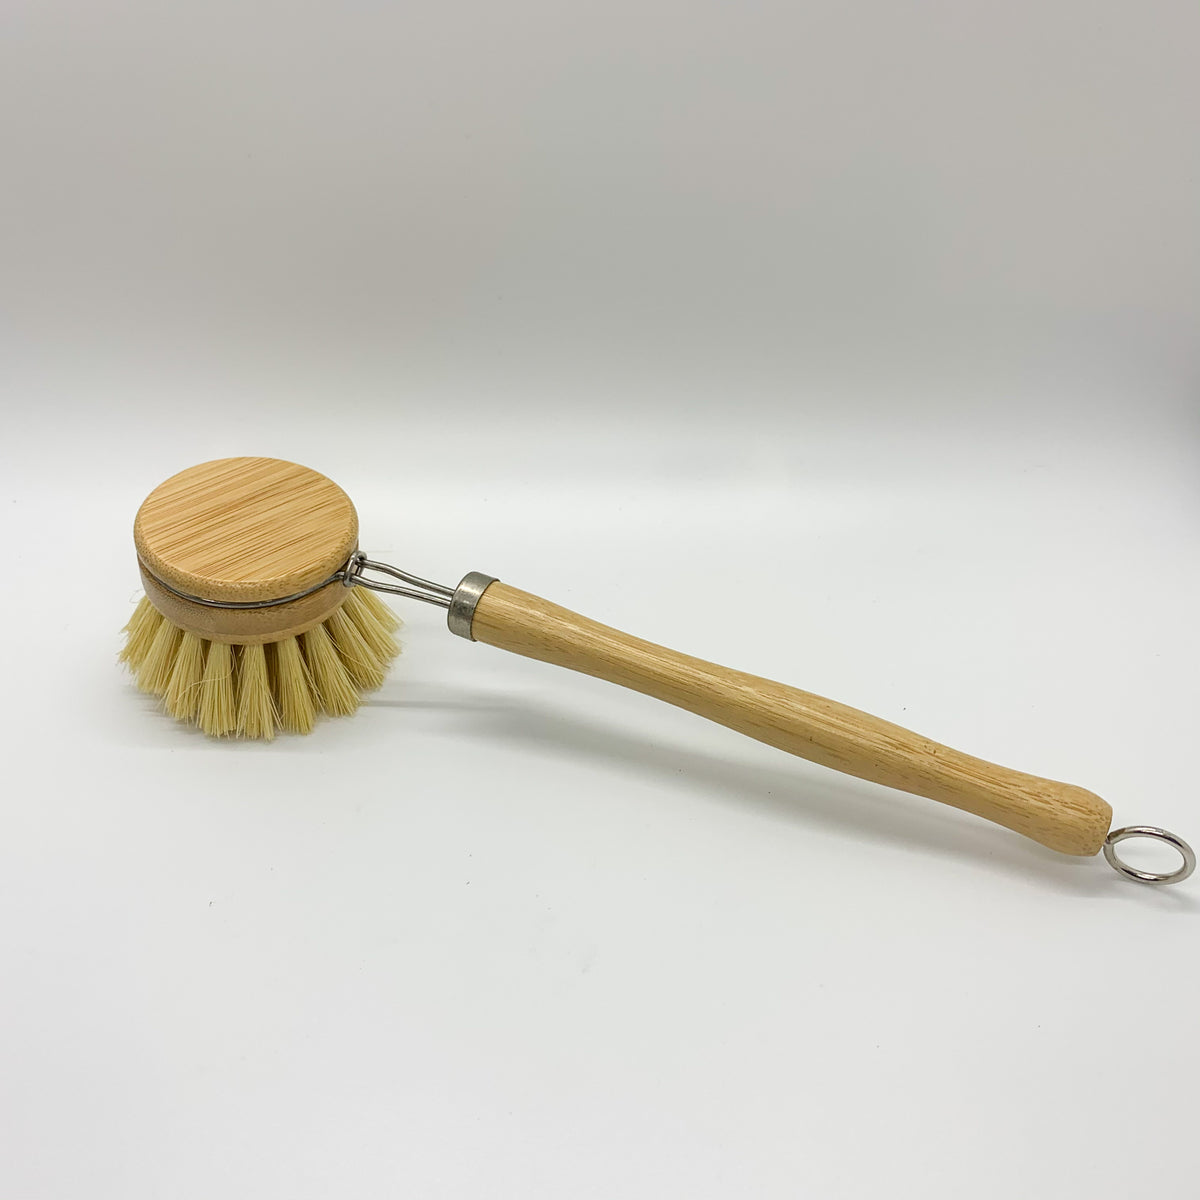 Replacement Sisal and Coconut Brush Heads for Bamboo Dish Brush